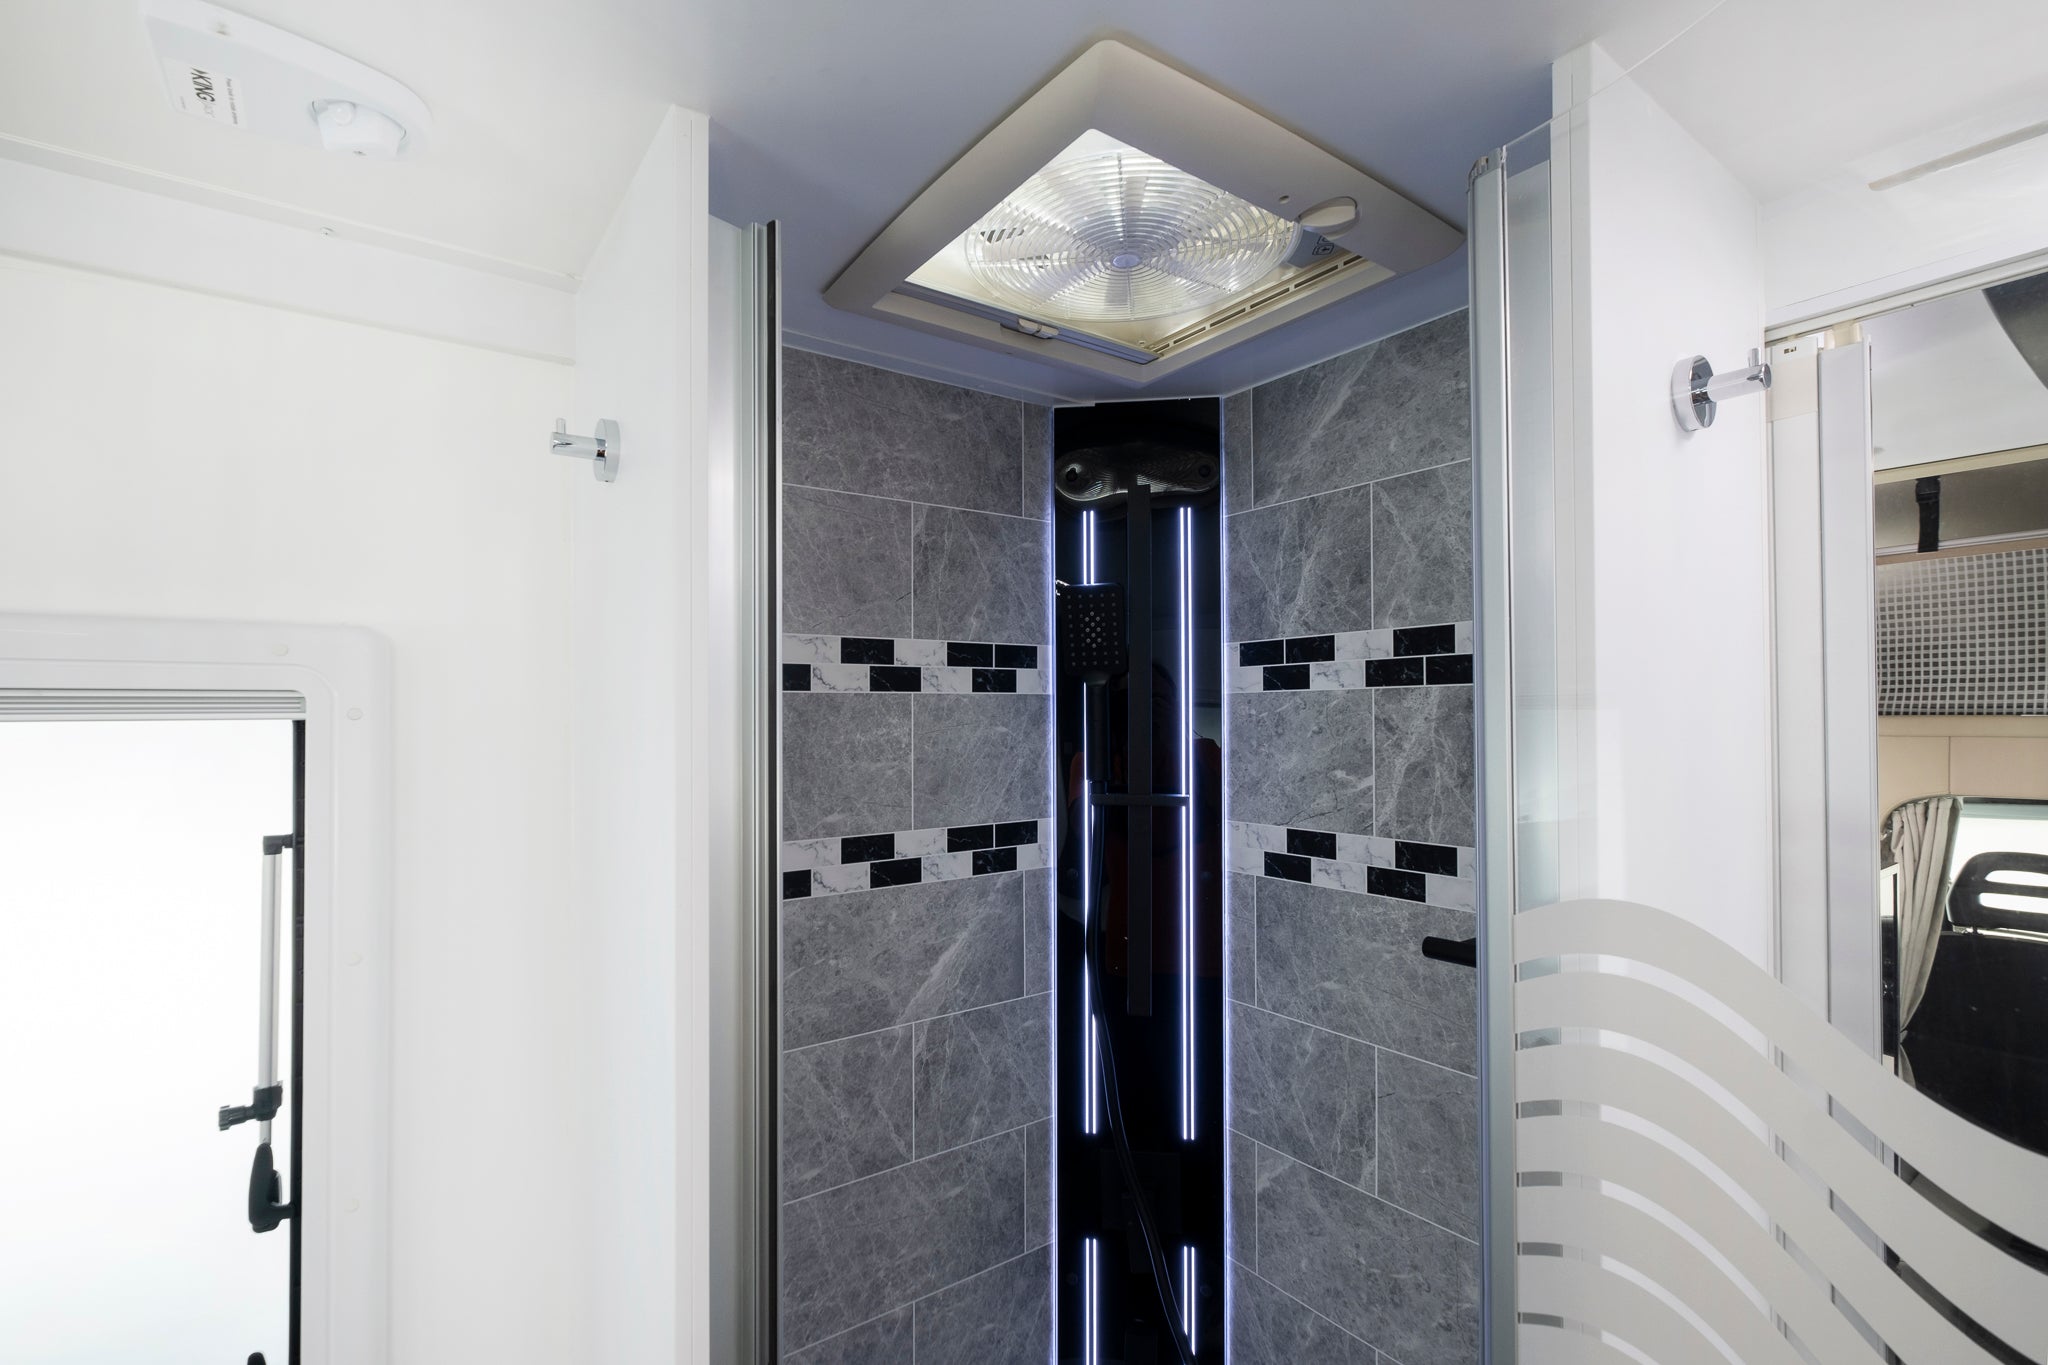 Winnebago Iluka shower with extractor fan and feature lighting